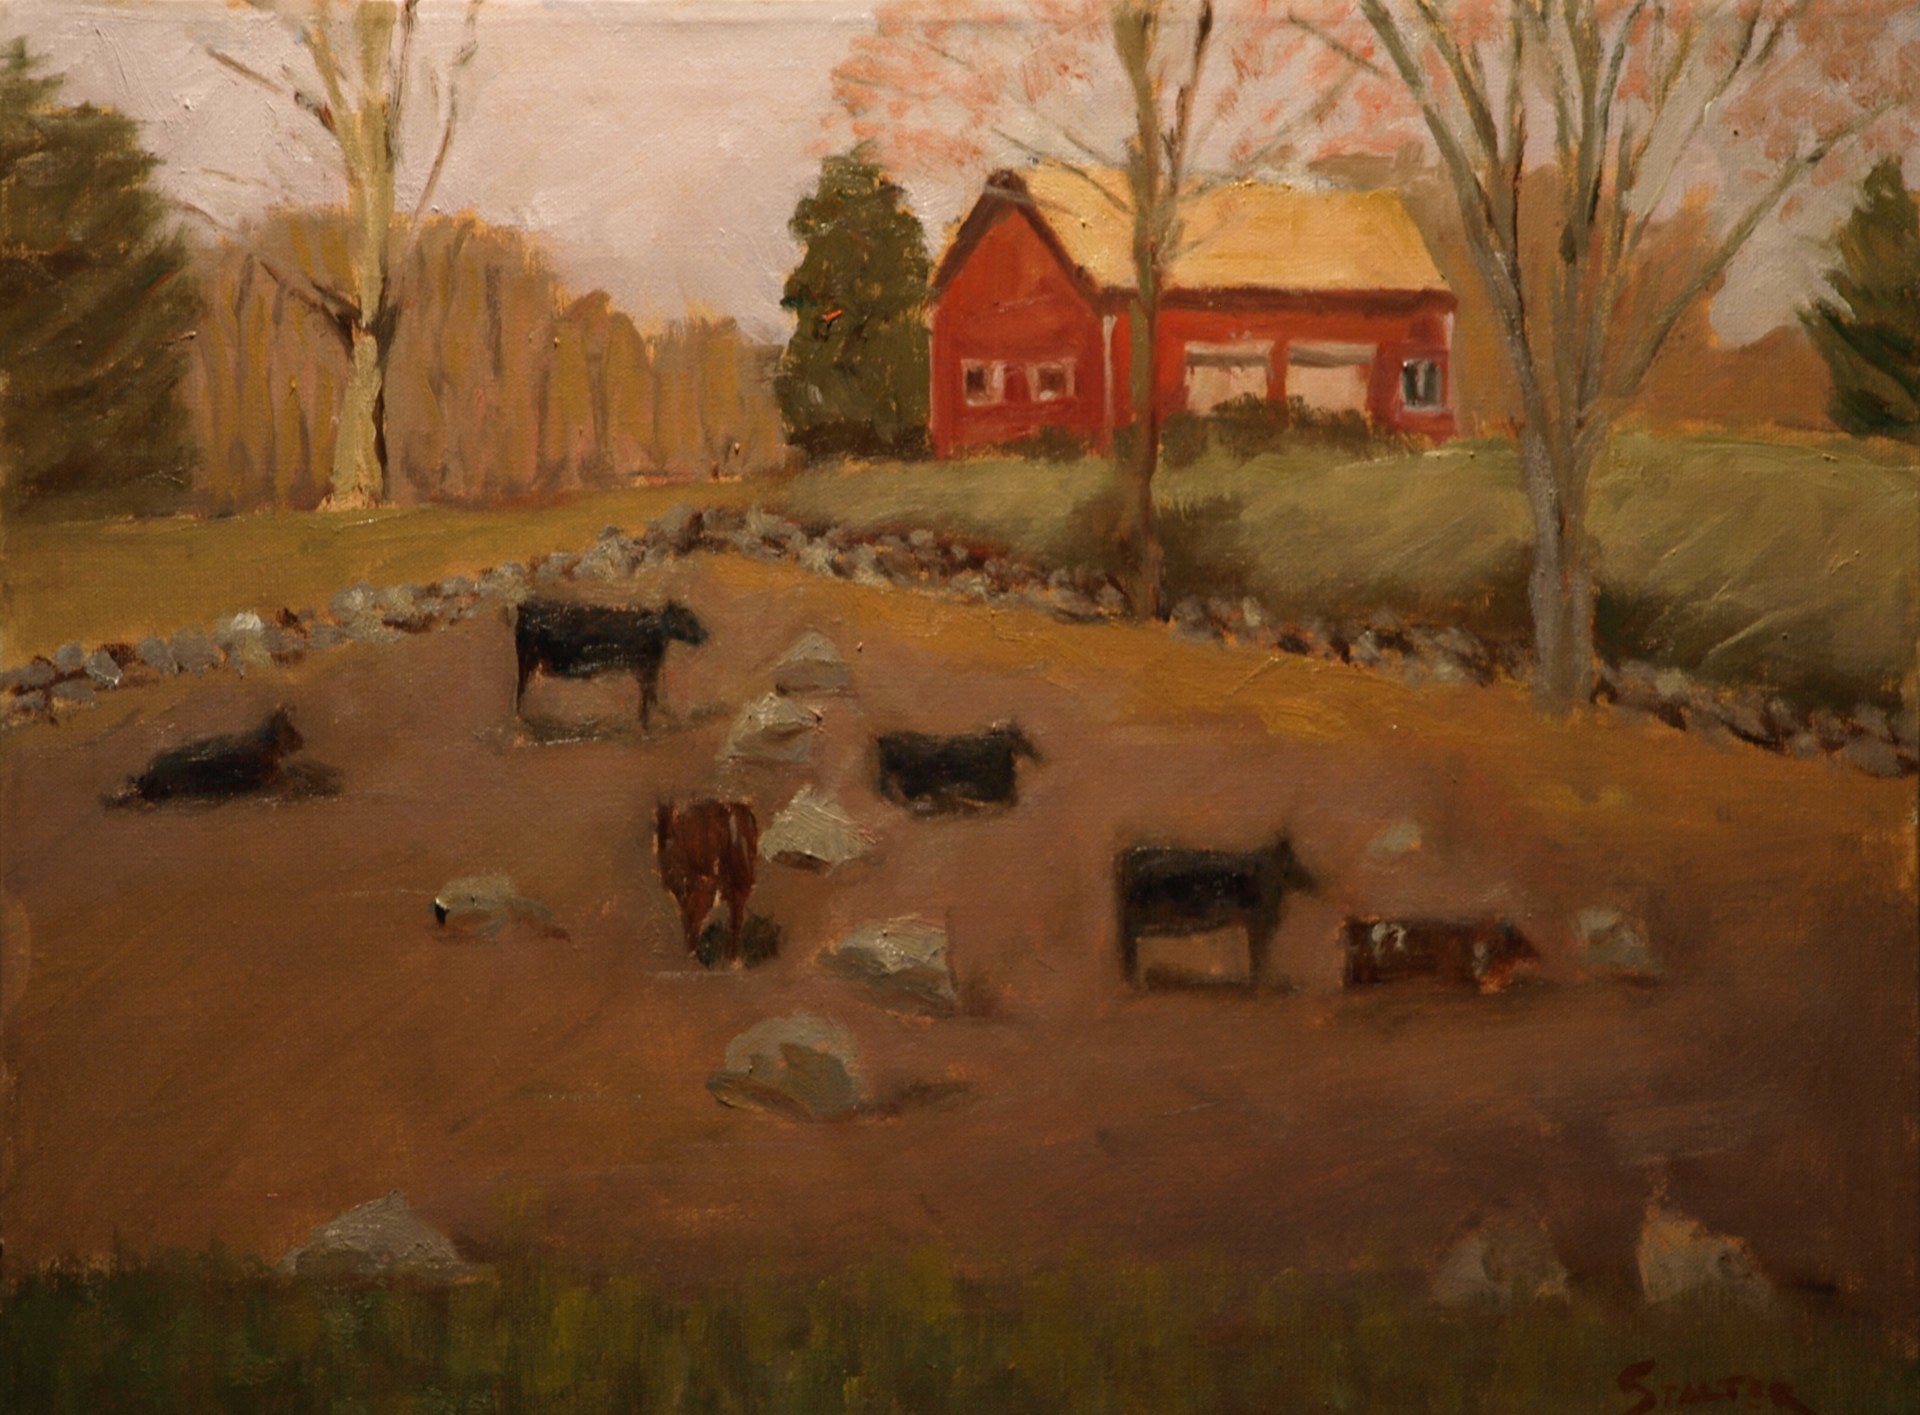 Cows - Hipp Farm, Oil on Canvas, 16 x 20 Inches, by Richard Stalter, $425